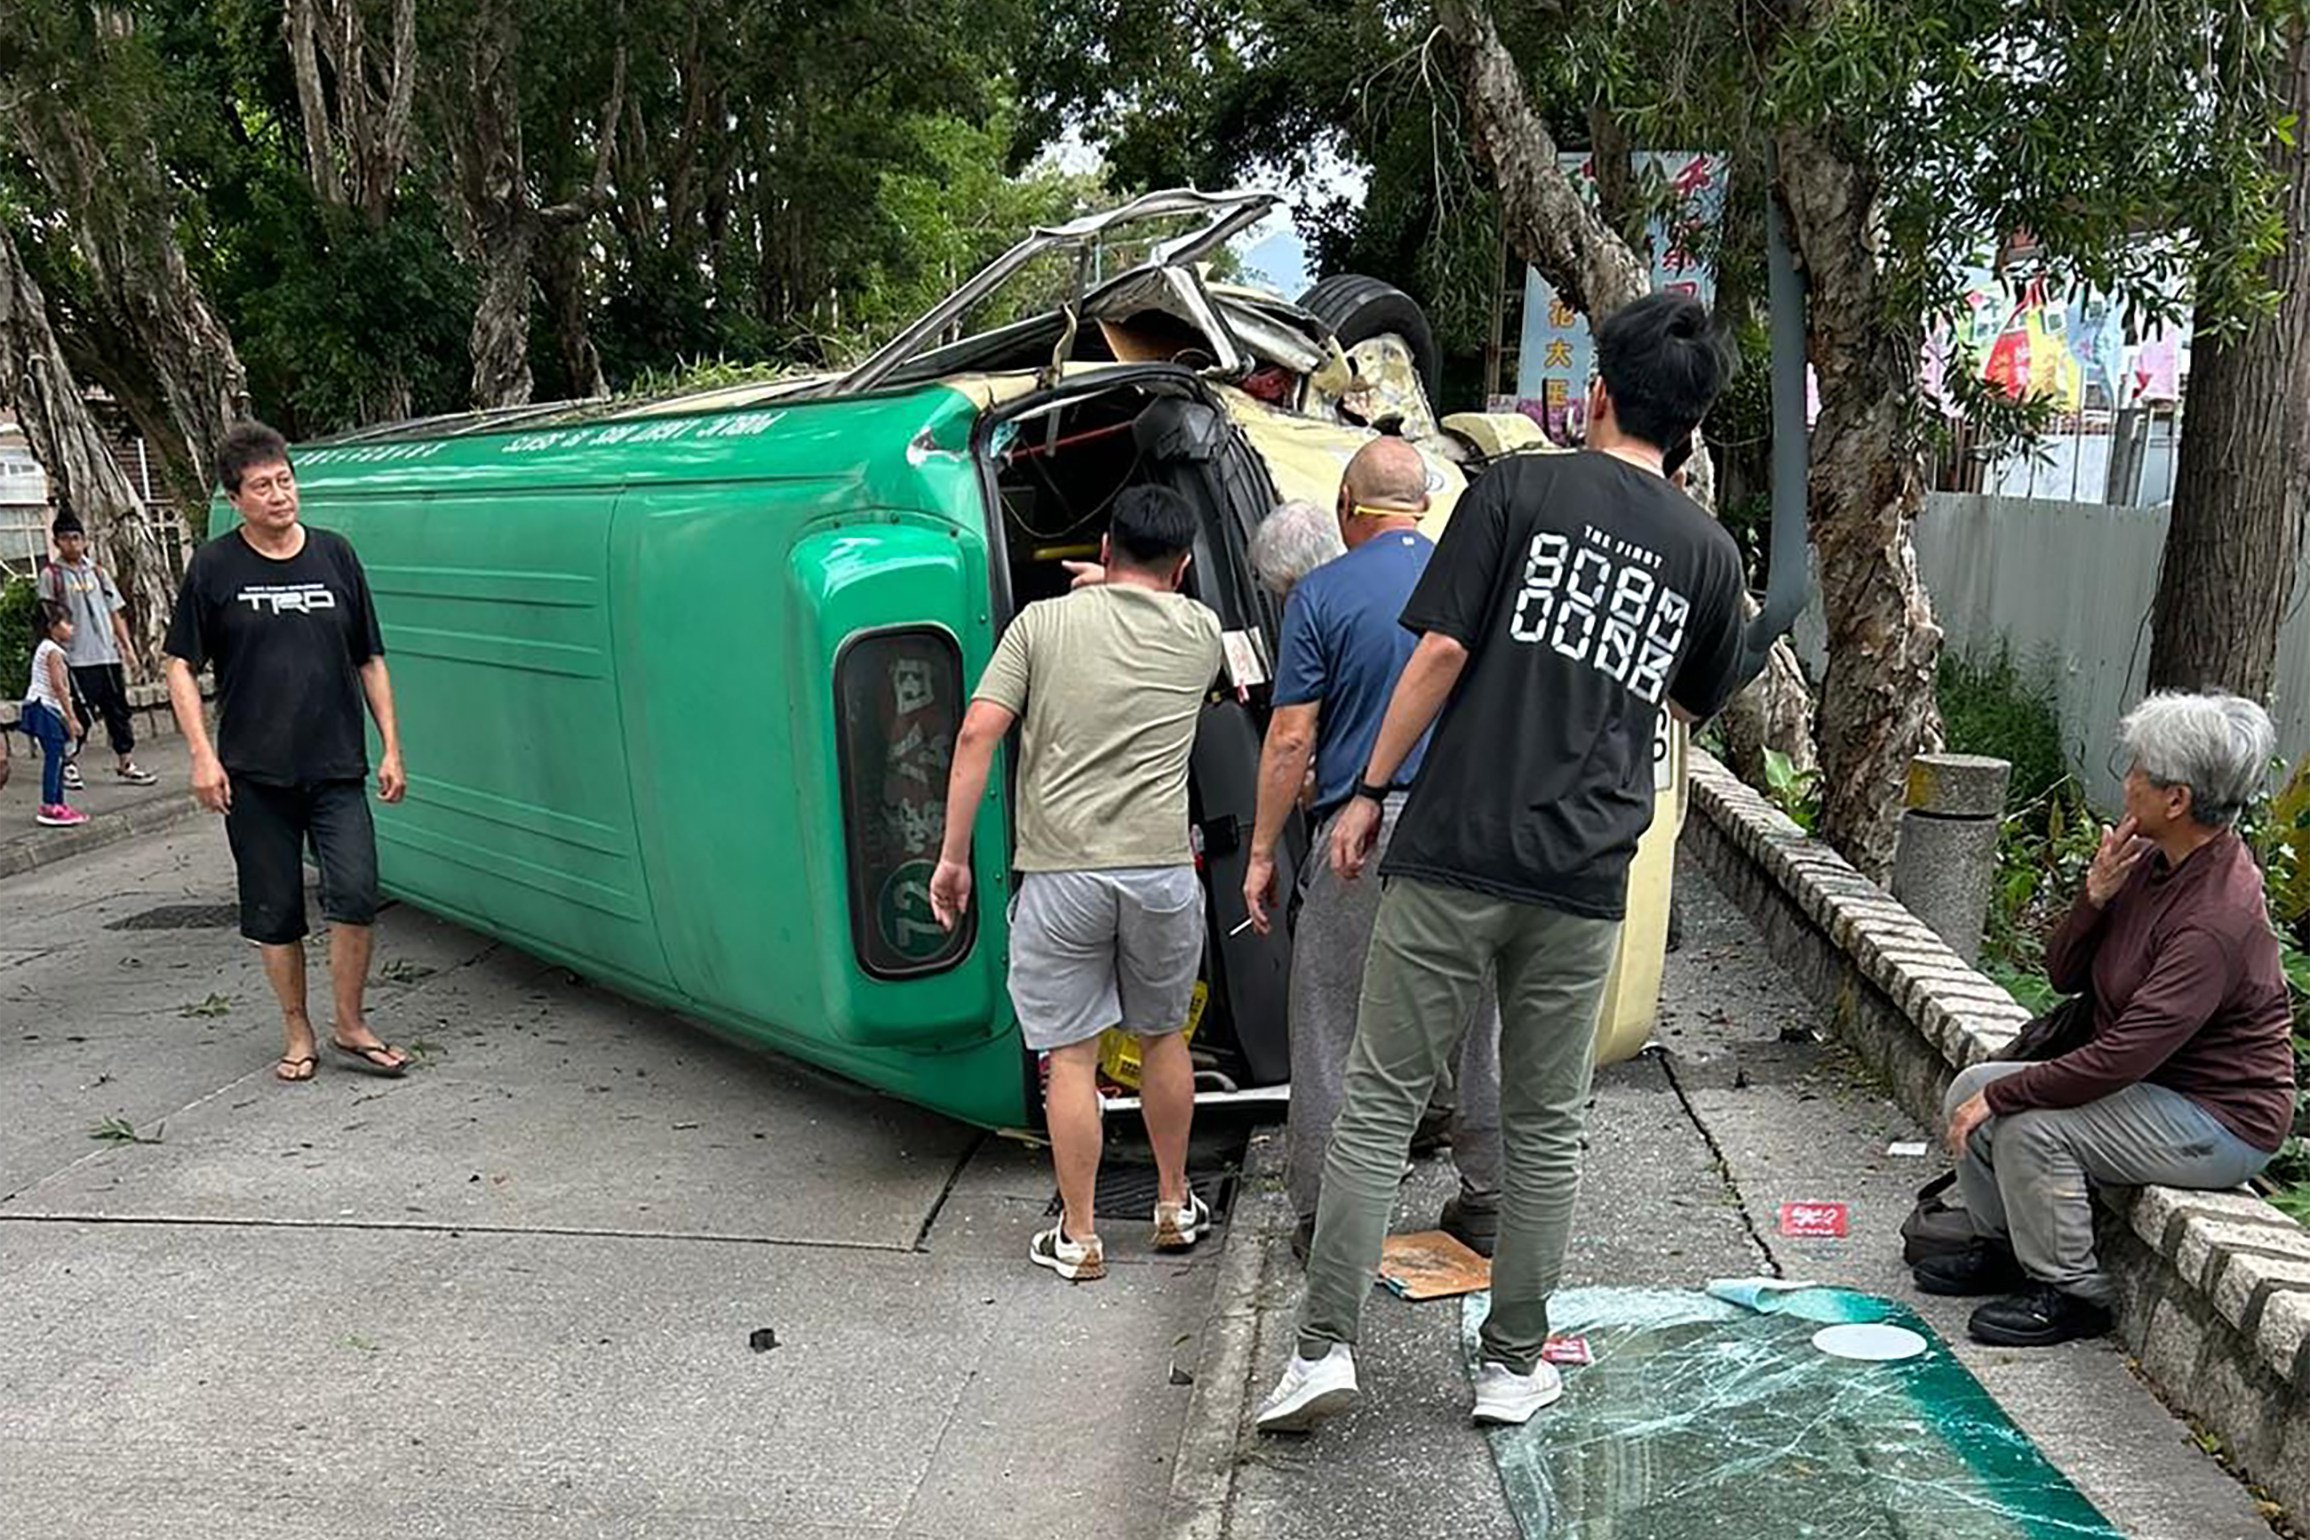 The minibus flipped over after hitting a lamp post following the crash. Photo: Facebook / @ Keylex Chow